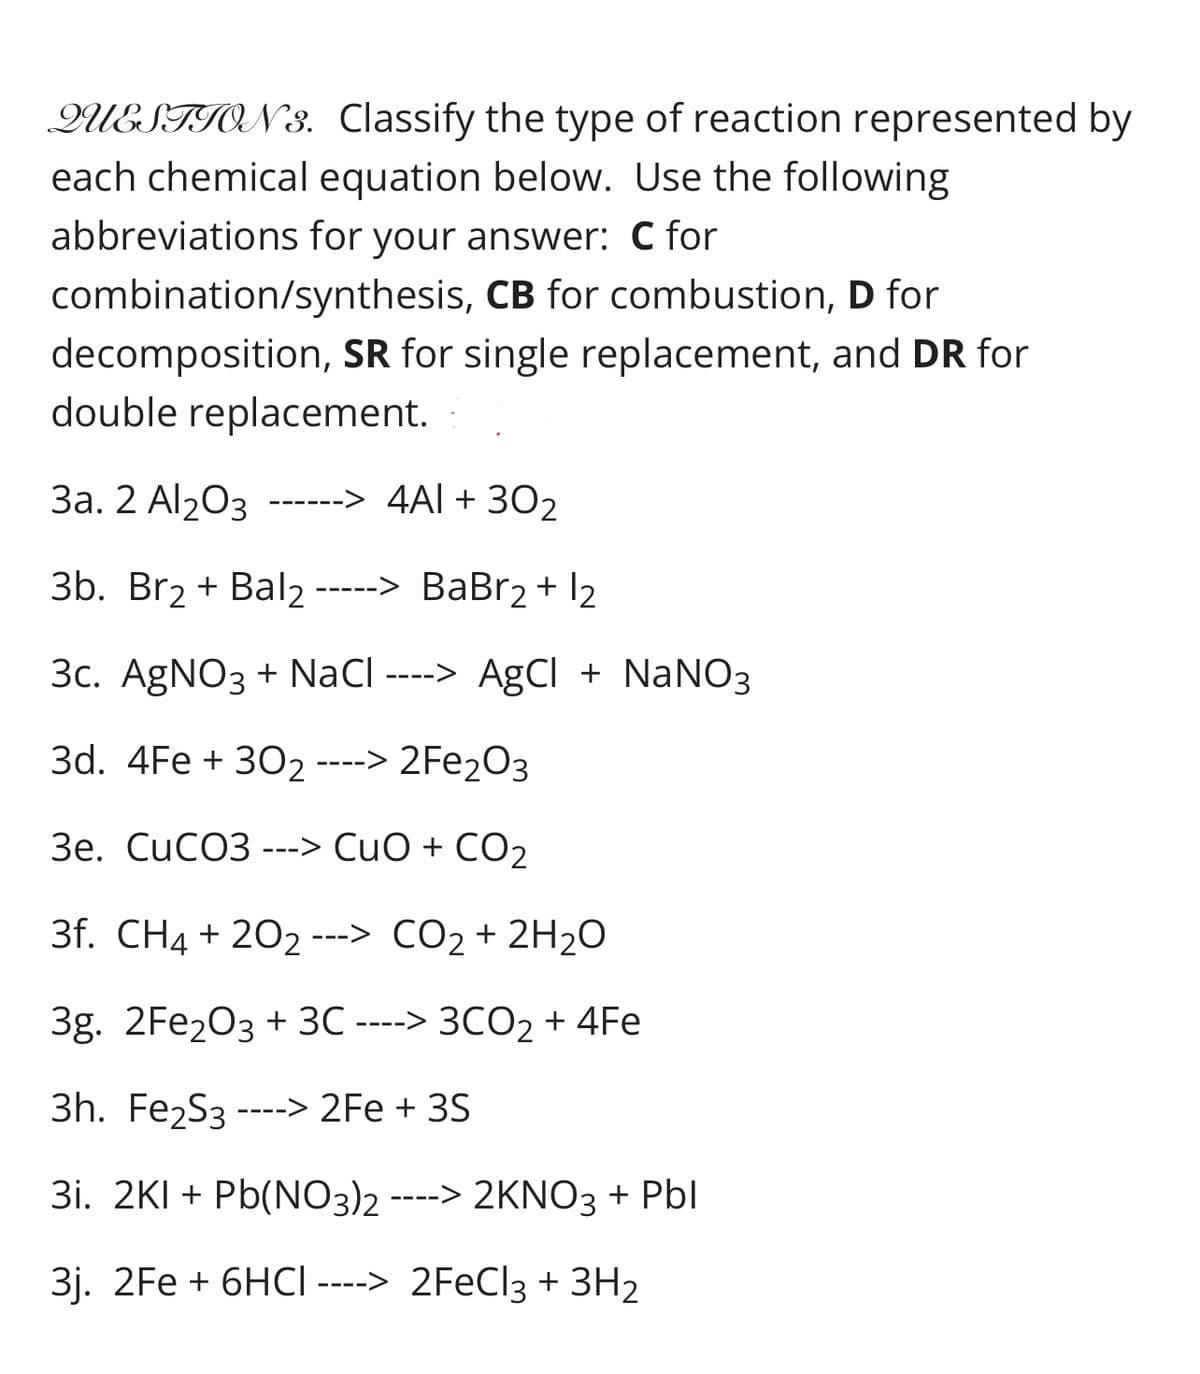 QUESTION 3. Classify the type of reaction represented by
each chemical equation below. Use the following
abbreviations for your answer: C for
combination/synthesis, CB for combustion, D for
decomposition, SR for single replacement, and DR for
double replacement.
За. 2 Al20з
302
------> 4AL +
3b. Br2 + Bal2 ----
-> BaBr2 + I2
3c. AgNO3 + NaCl ----> AgCI + NaNO3
3d. 4Fe + 302 ----> 2Fe2O3
Зе. CиCОЗ ---> CuO + CO2
3f. CH4 + 202 ---> CO2 + 2H20
3g. 2Fe203 + 3C ----> 3CO2 + 4Fe
3h. Fe2S3
2Fe + 3S
---->
3i. 2KI + Pb(NO3)2 ----> 2KNO3 + Pbl
3j. 2Fe + 6HCI ----> 2FECI3 + 3H2
